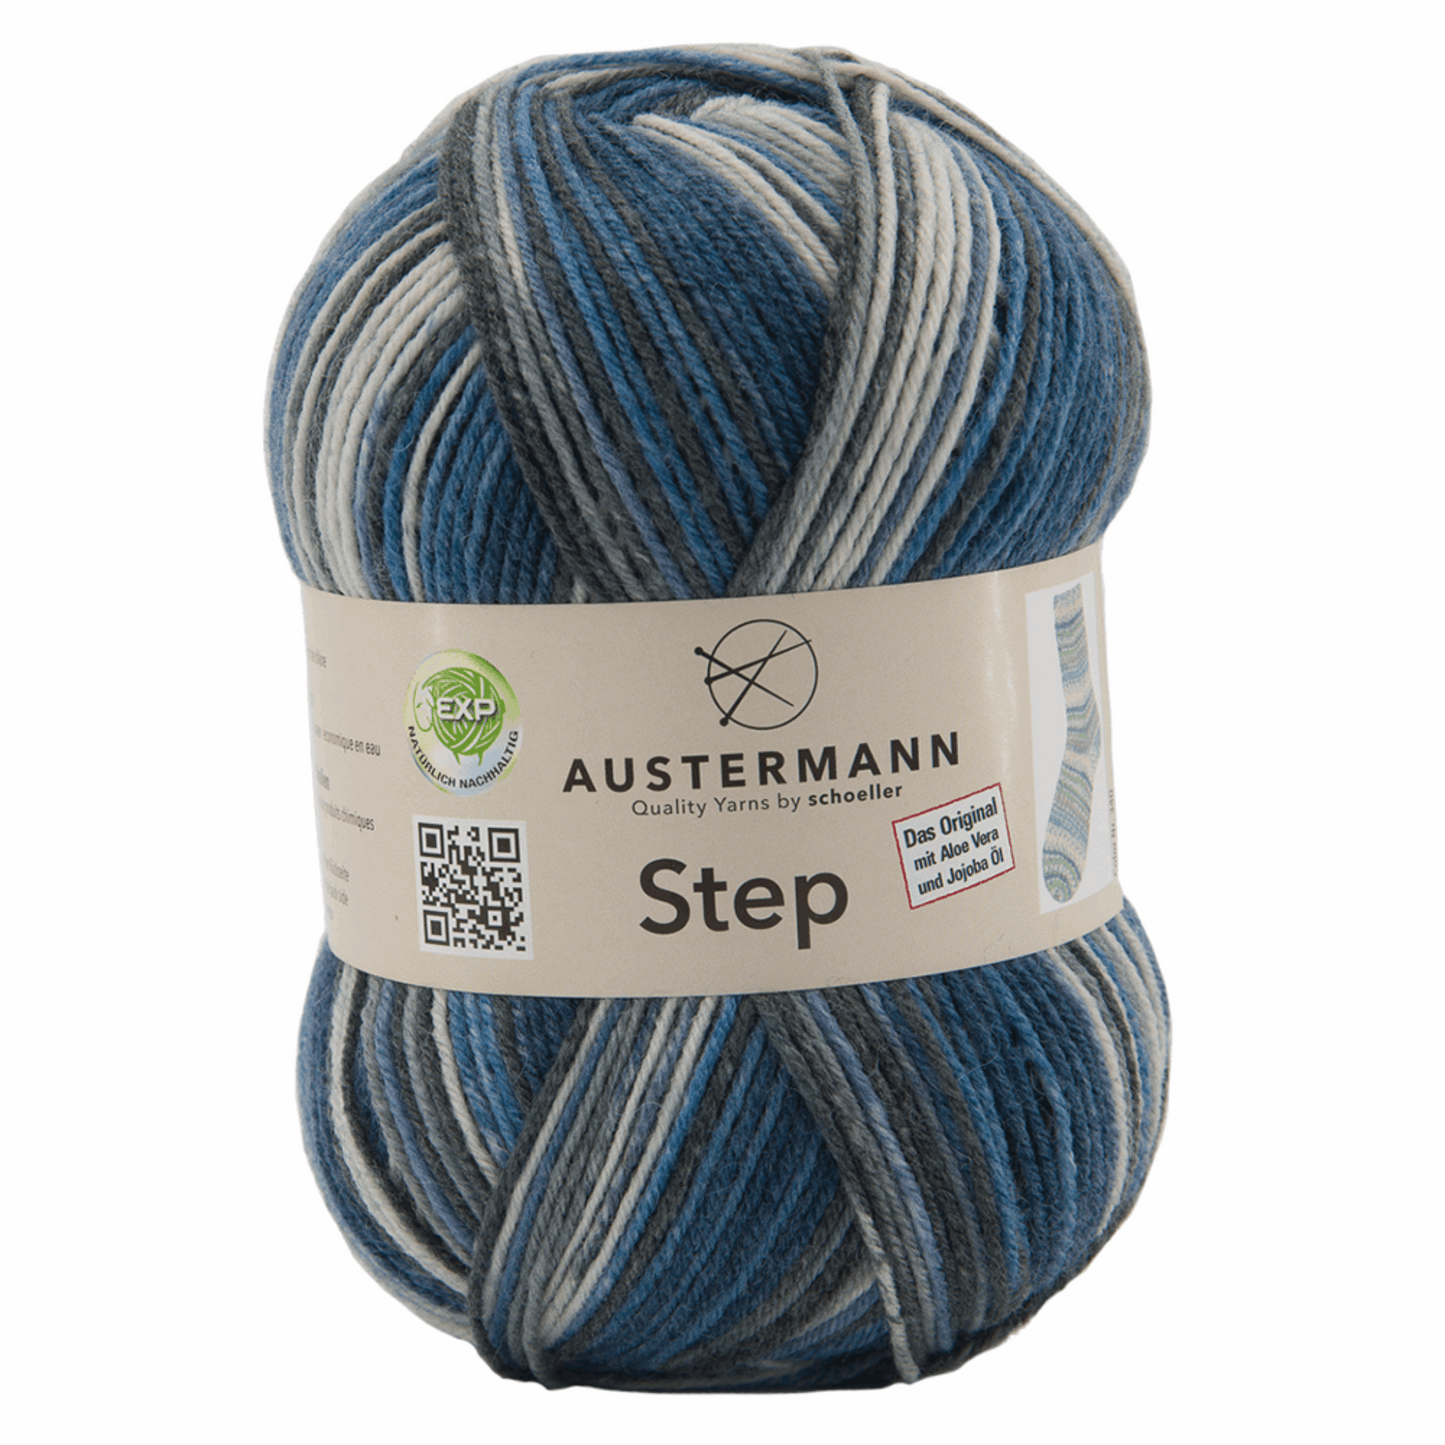 Austermann Step 4F Color 100g, 97689, Farbe jeans 274